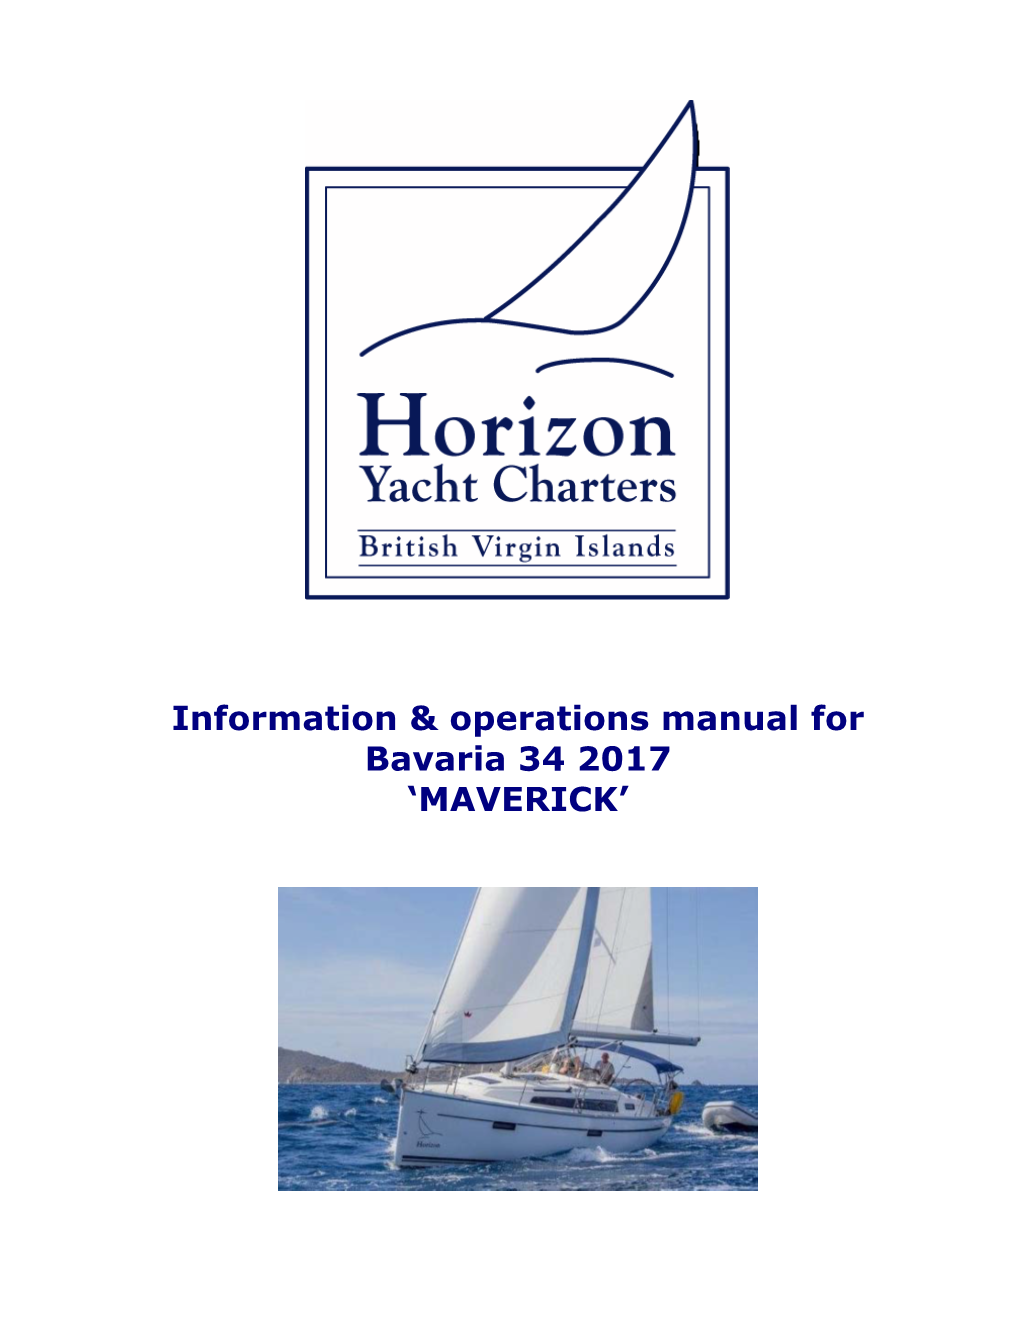 Information & Operations Manual for Bavaria